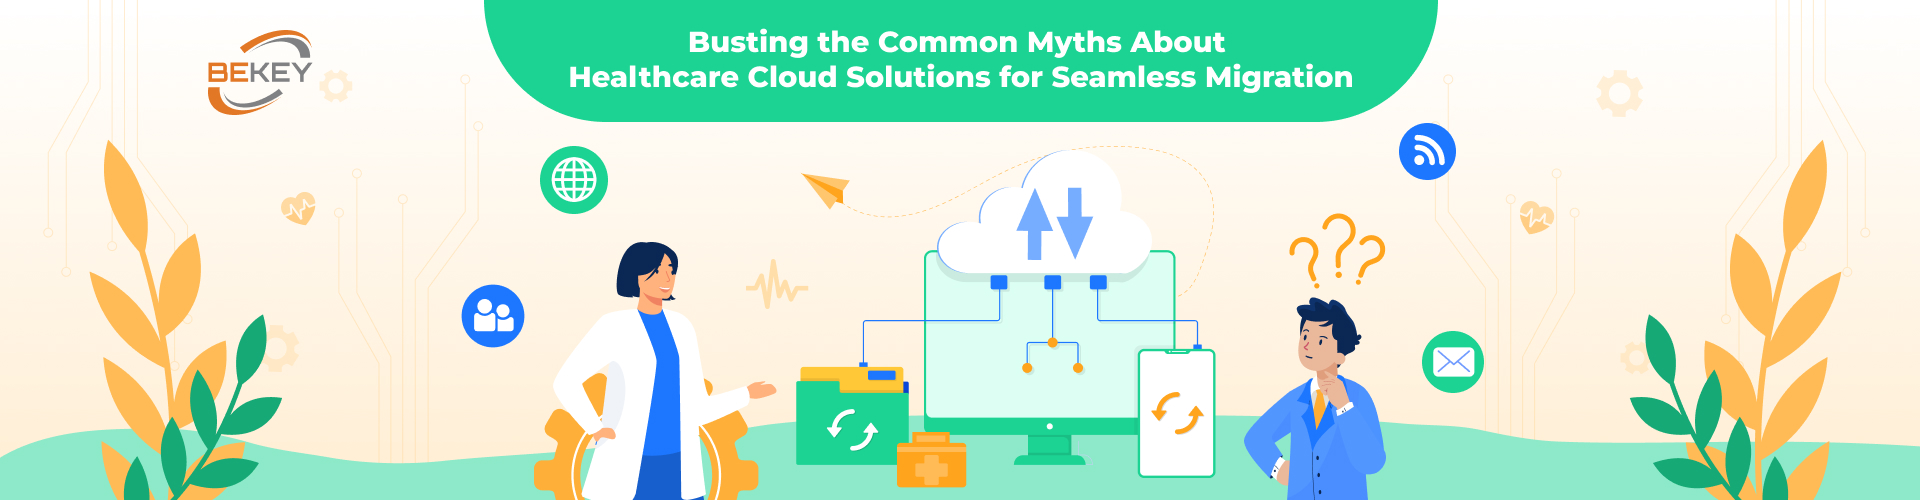 Busting the Common Myths About Healthcare Cloud Solutions for Seamless Migration - image